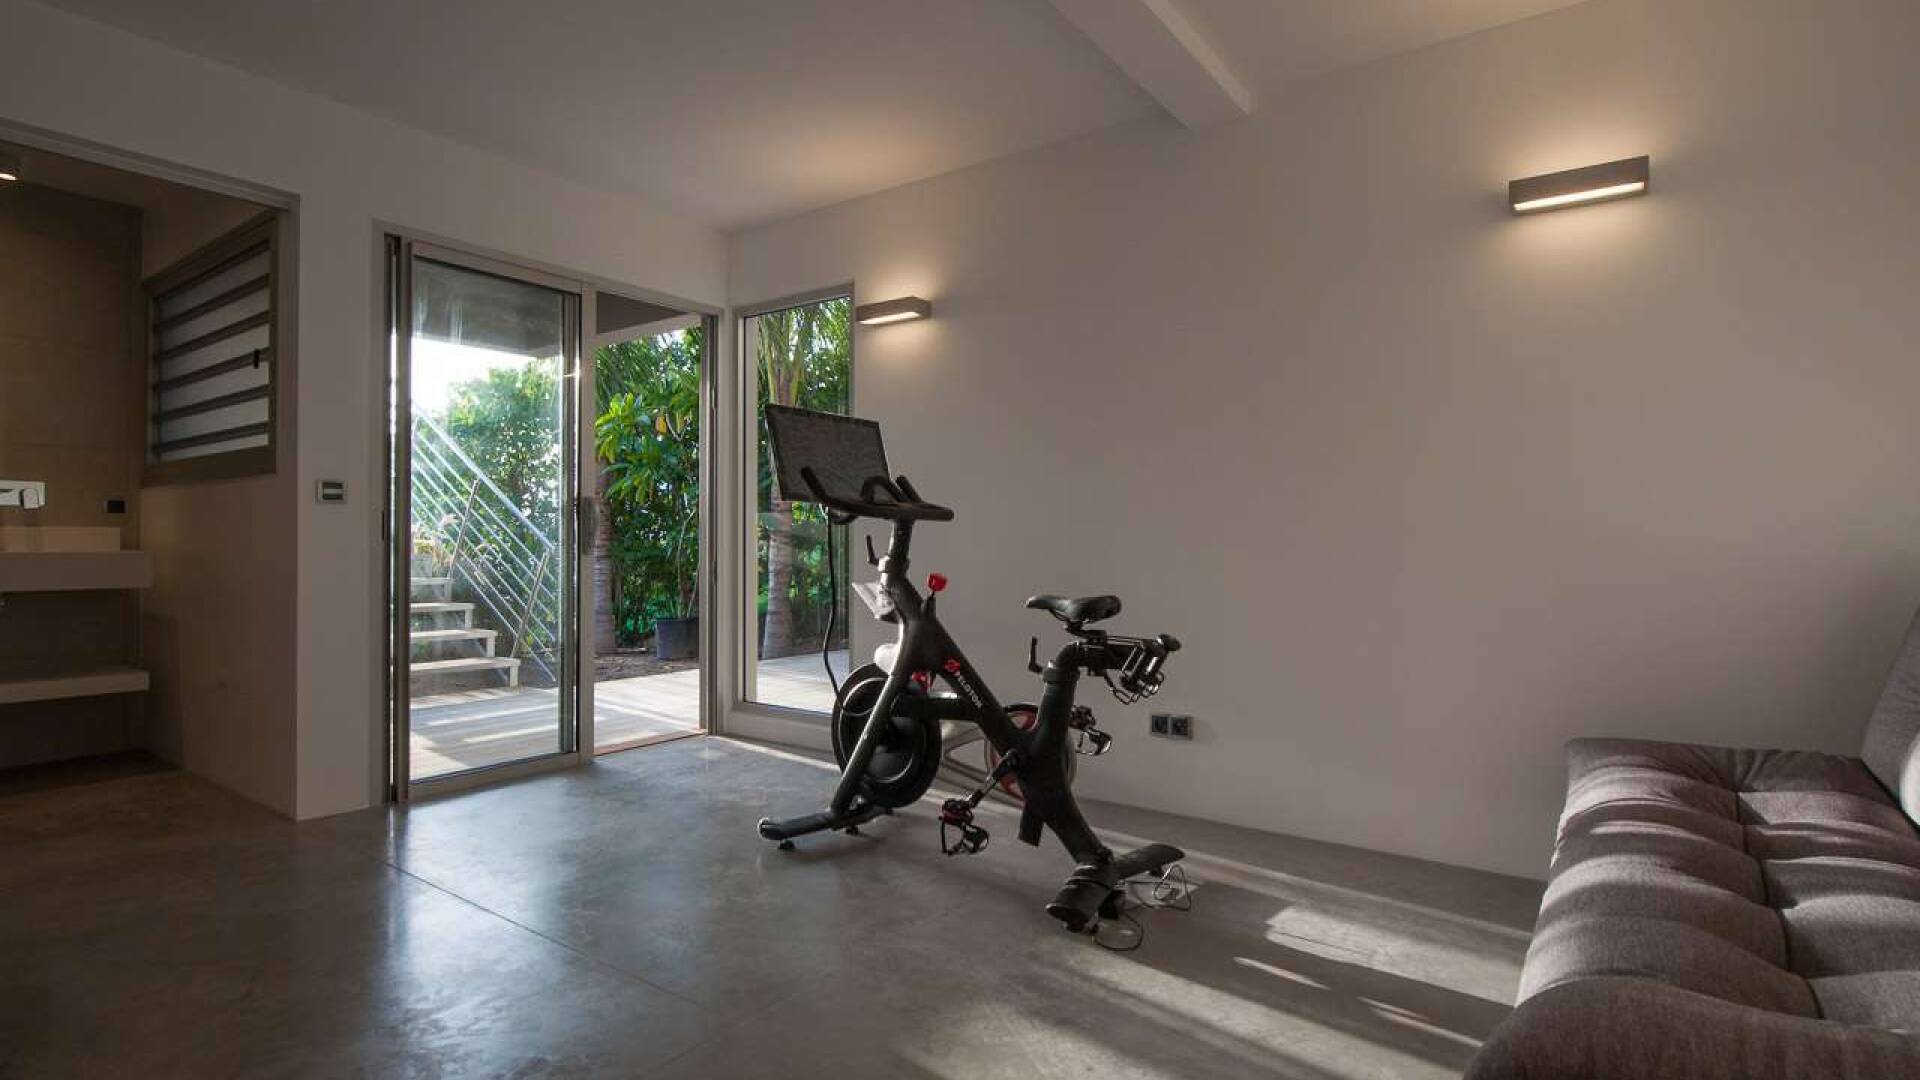 Gym at WV VPM, Pointe Milou, St. Barthelemy